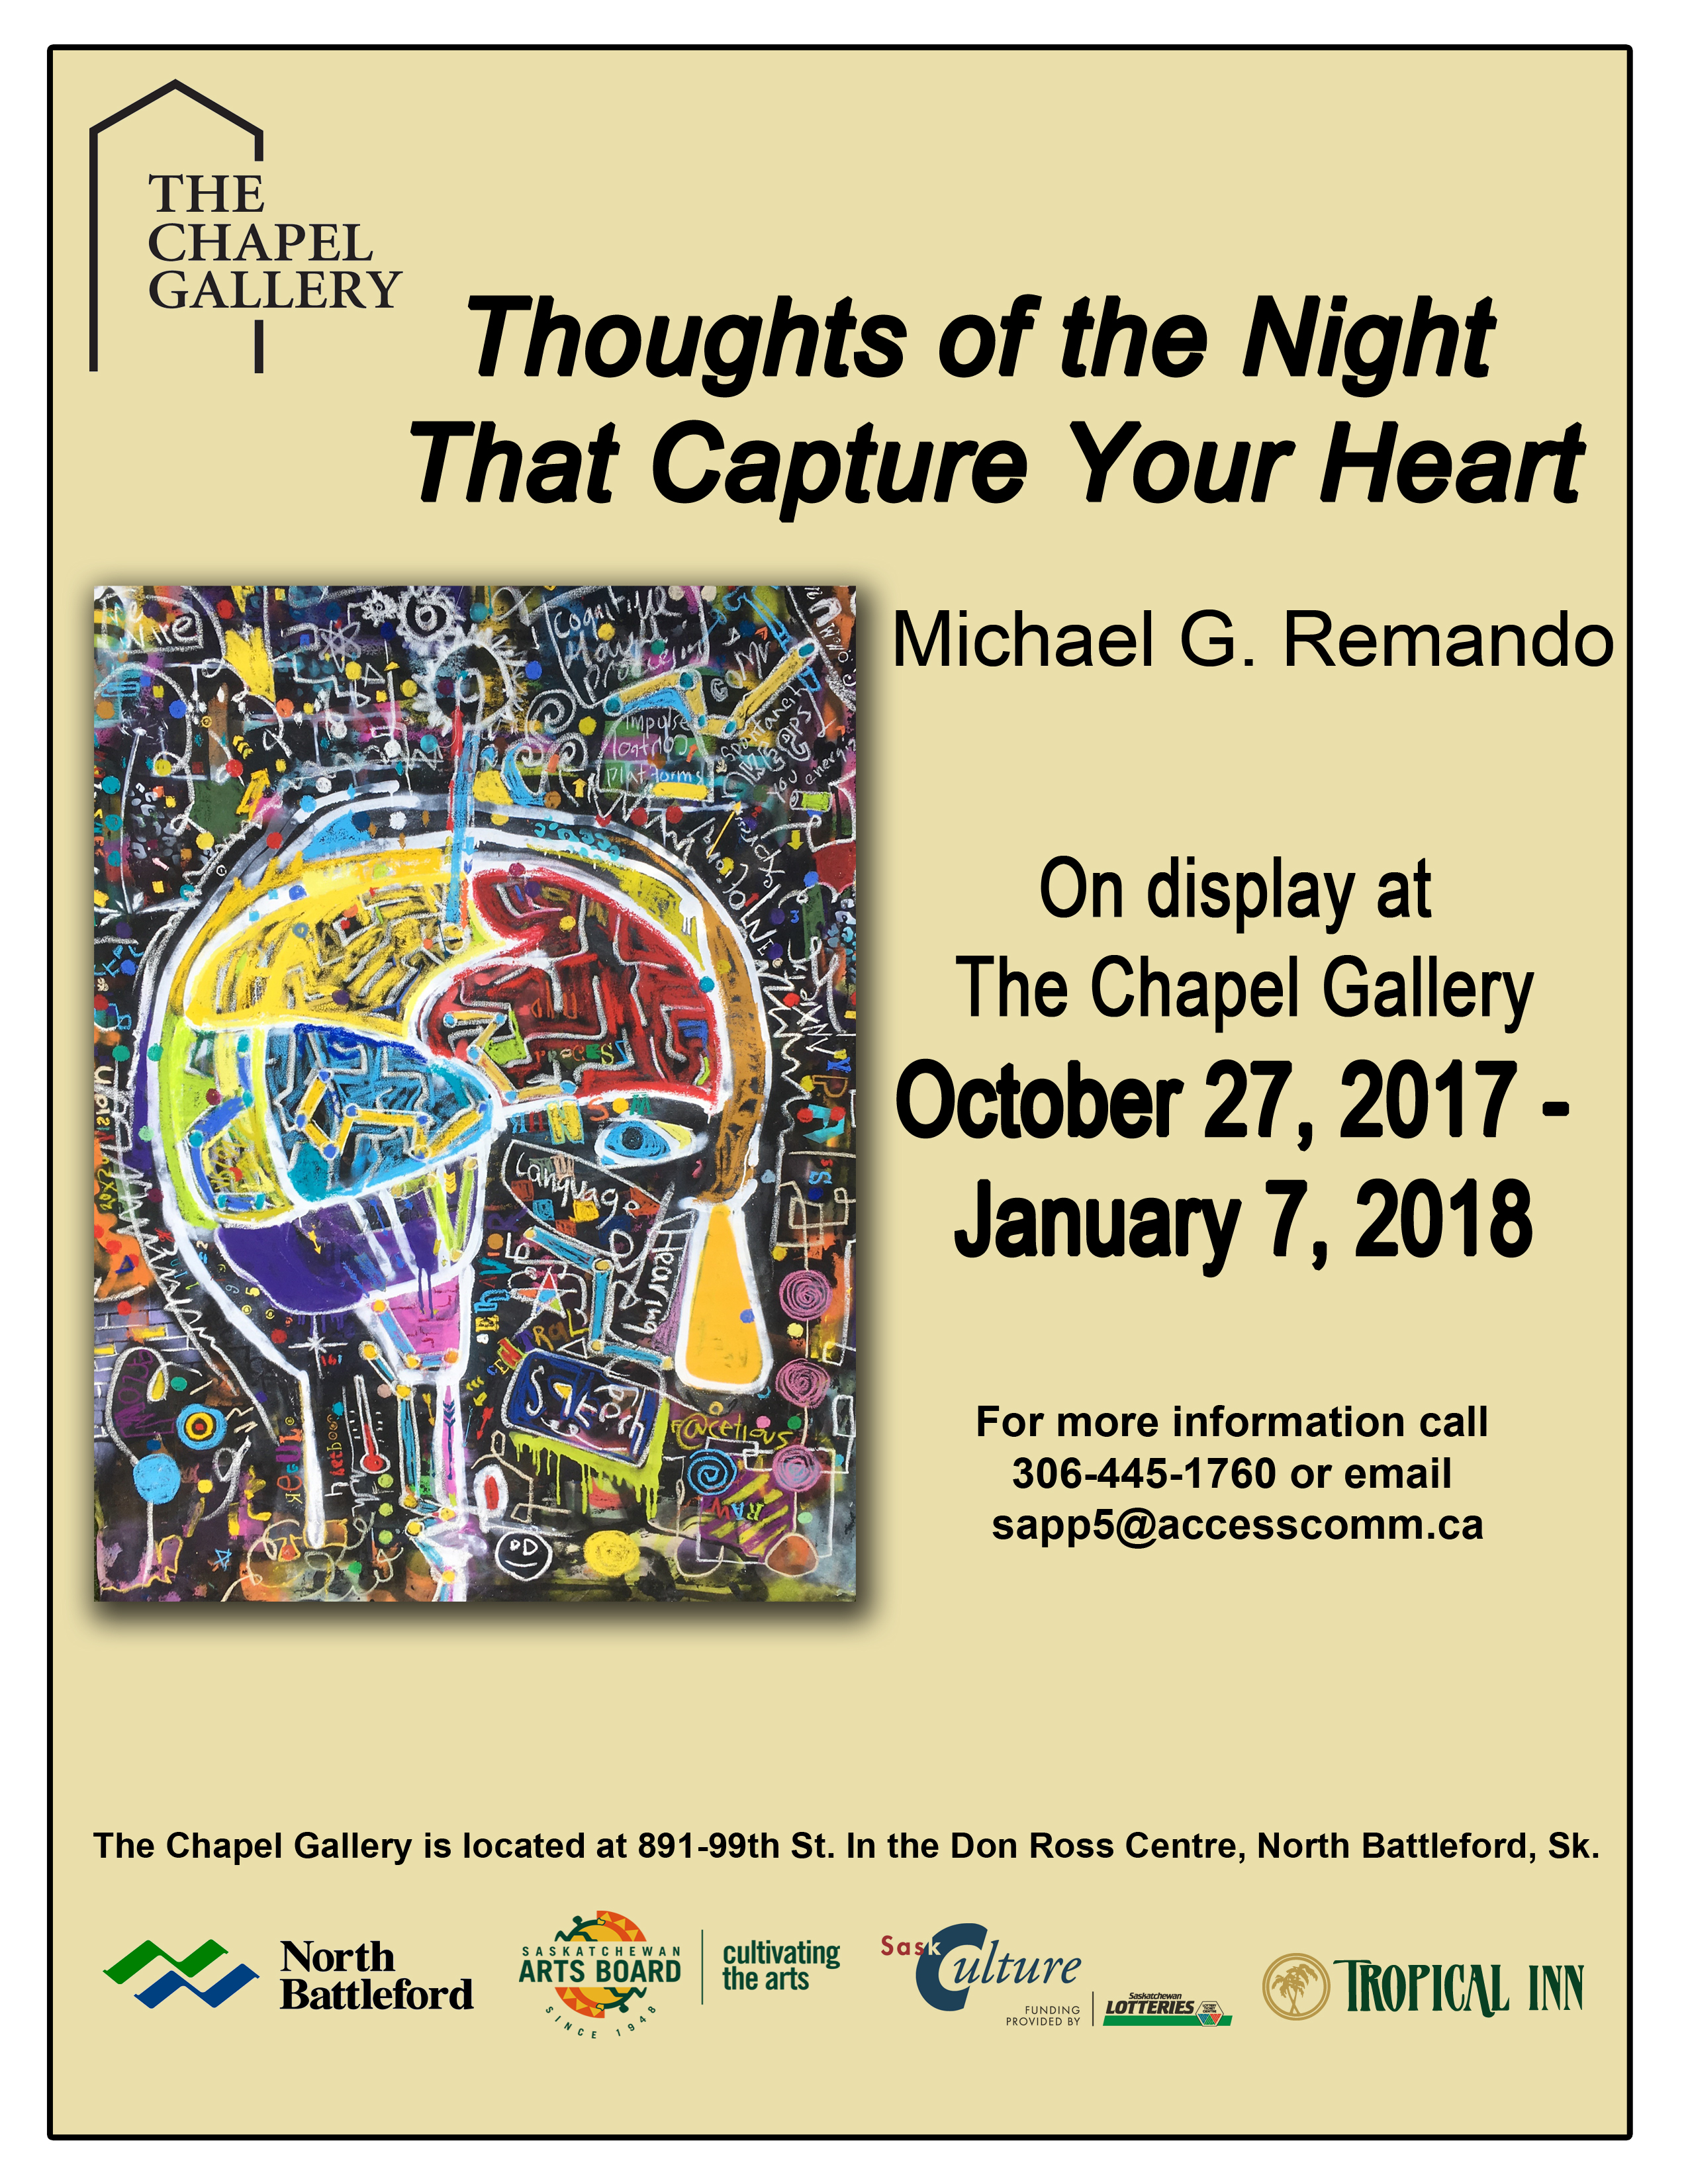 Thoughts_of_the_Night_That_Captures_Your_Heart_-_Michael_G_Remando